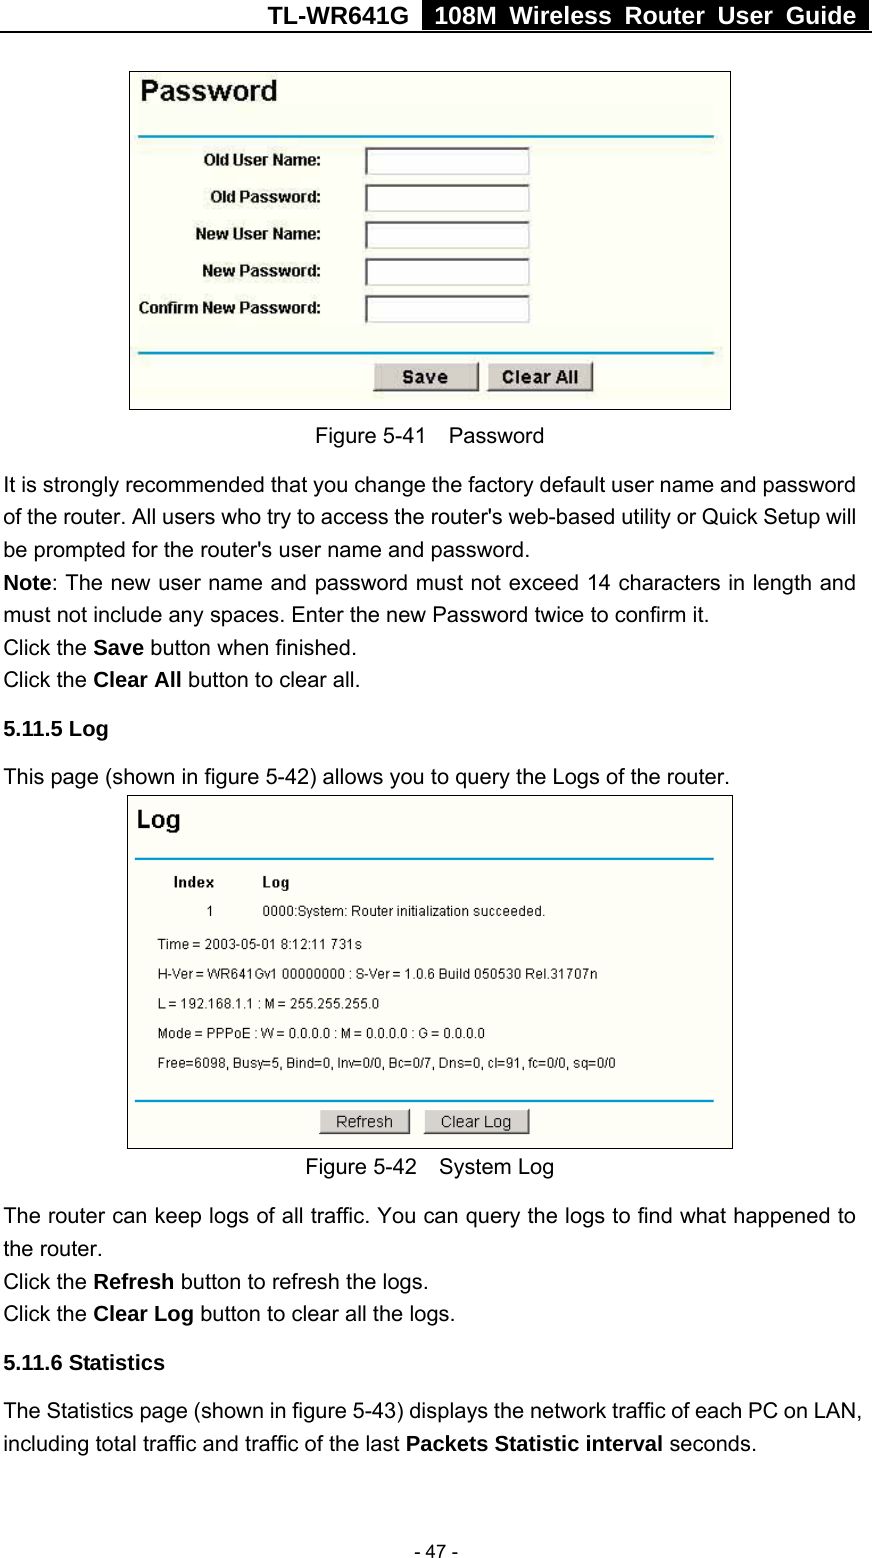 TL-WR641G   108M Wireless Router User Guide   - 47 - Figure 5-41  Password It is strongly recommended that you change the factory default user name and password of the router. All users who try to access the router&apos;s web-based utility or Quick Setup will be prompted for the router&apos;s user name and password. Note: The new user name and password must not exceed 14 characters in length and must not include any spaces. Enter the new Password twice to confirm it. Click the Save button when finished. Click the Clear All button to clear all. 5.11.5 Log This page (shown in figure 5-42) allows you to query the Logs of the router.    Figure 5-42  System Log The router can keep logs of all traffic. You can query the logs to find what happened to the router. Click the Refresh button to refresh the logs. Click the Clear Log button to clear all the logs. 5.11.6 Statistics The Statistics page (shown in figure 5-43) displays the network traffic of each PC on LAN, including total traffic and traffic of the last Packets Statistic interval seconds.   